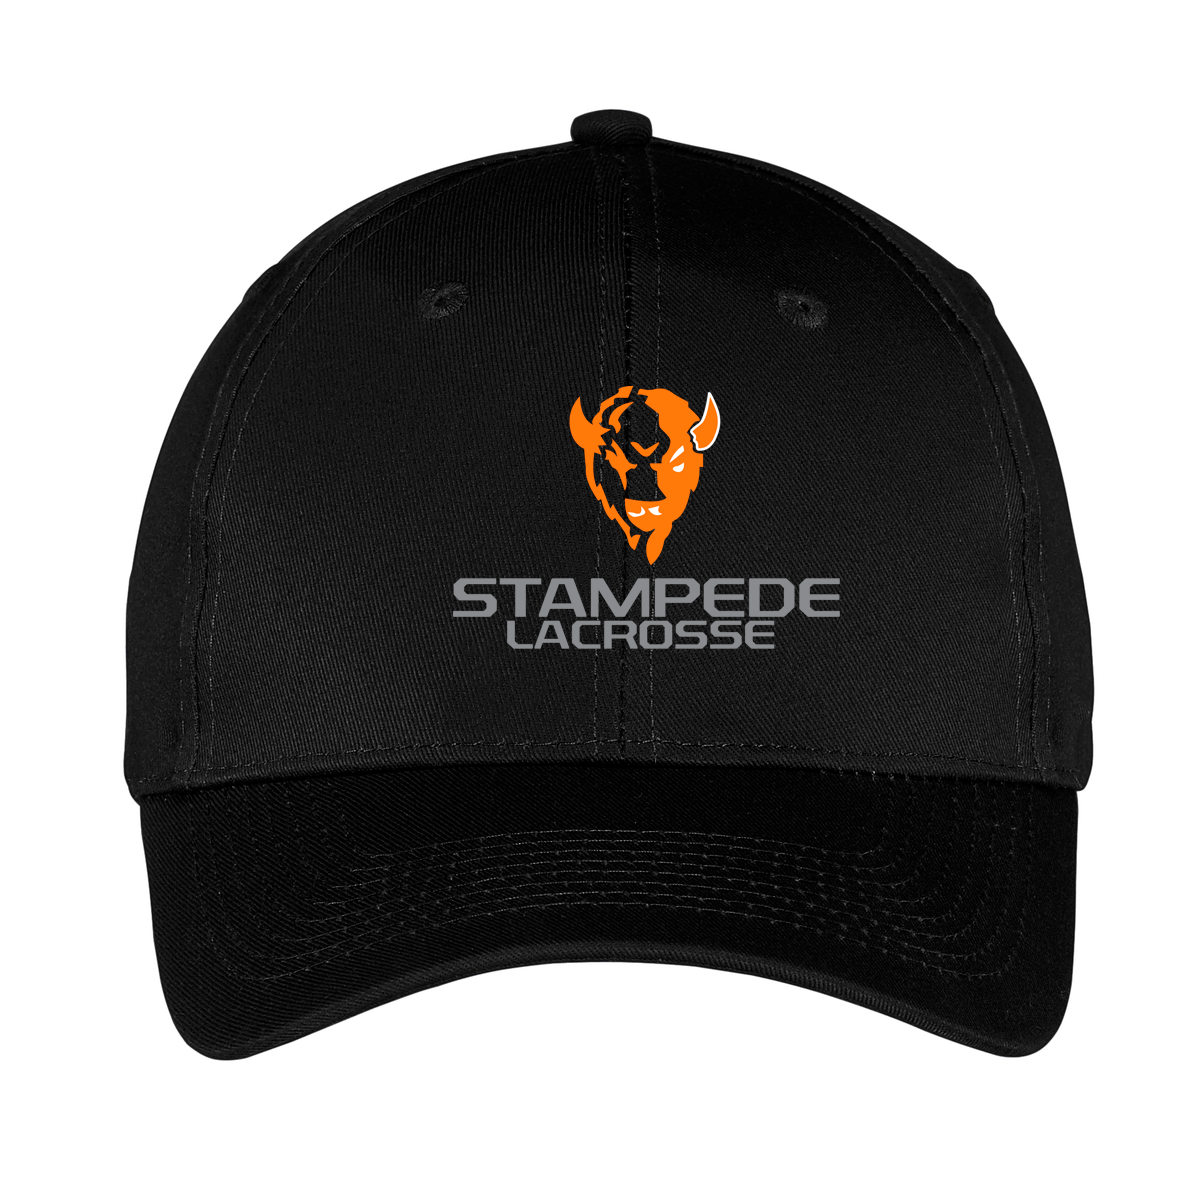 South Suburban Stampede Twill Cap